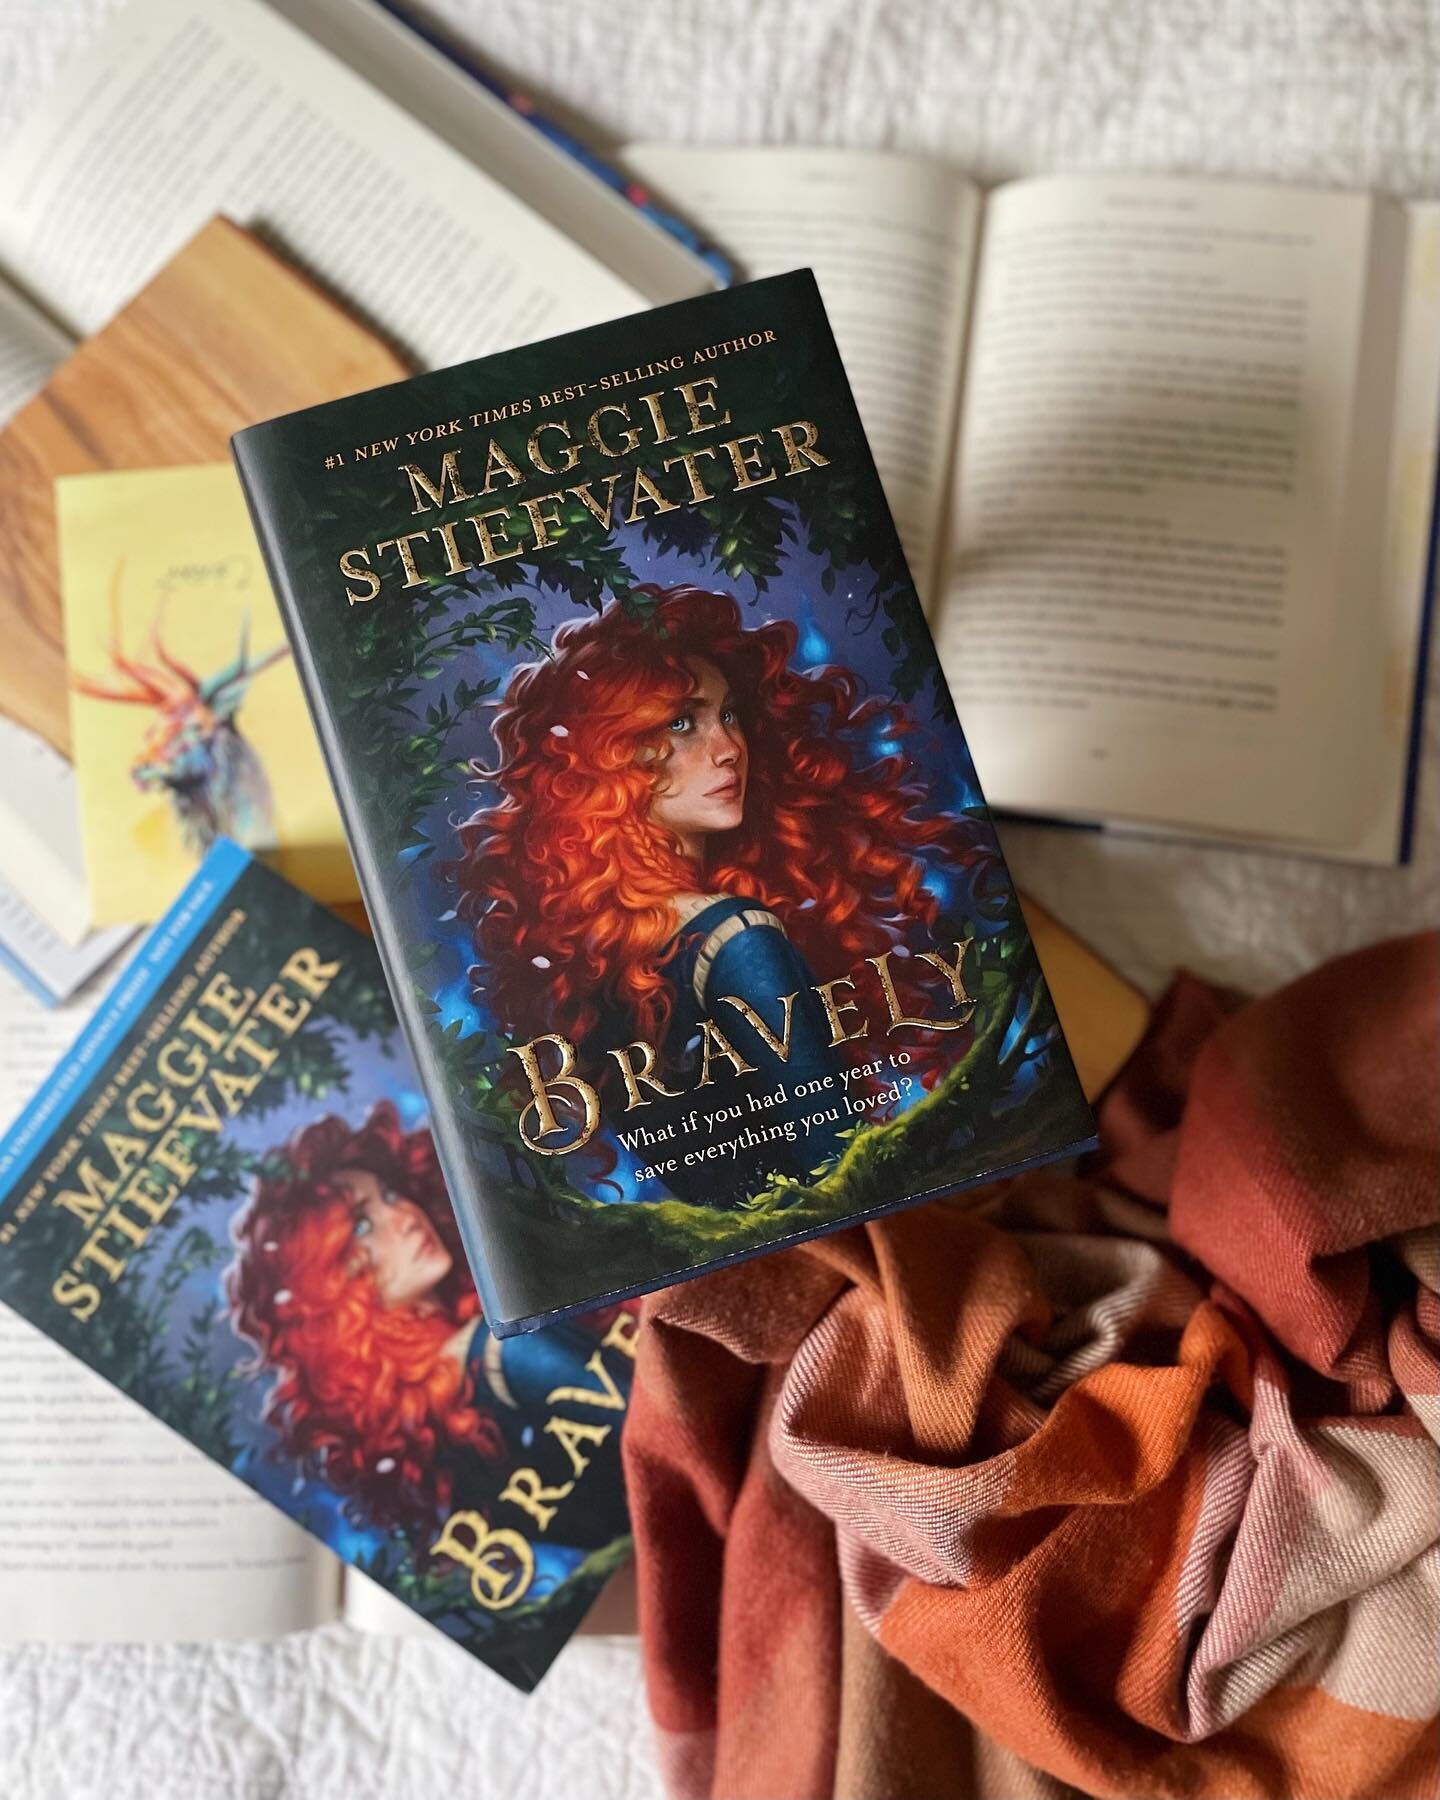 Happy Pub Day to Bravely!!!! Reading Bravely was a delight. A Scottish, prickly, stubborn delight, much like Merida

Maggie works her magic in DunBroch, slowly shifting the intangible to the tangible, anchoring gods to the ground, and tumbling around